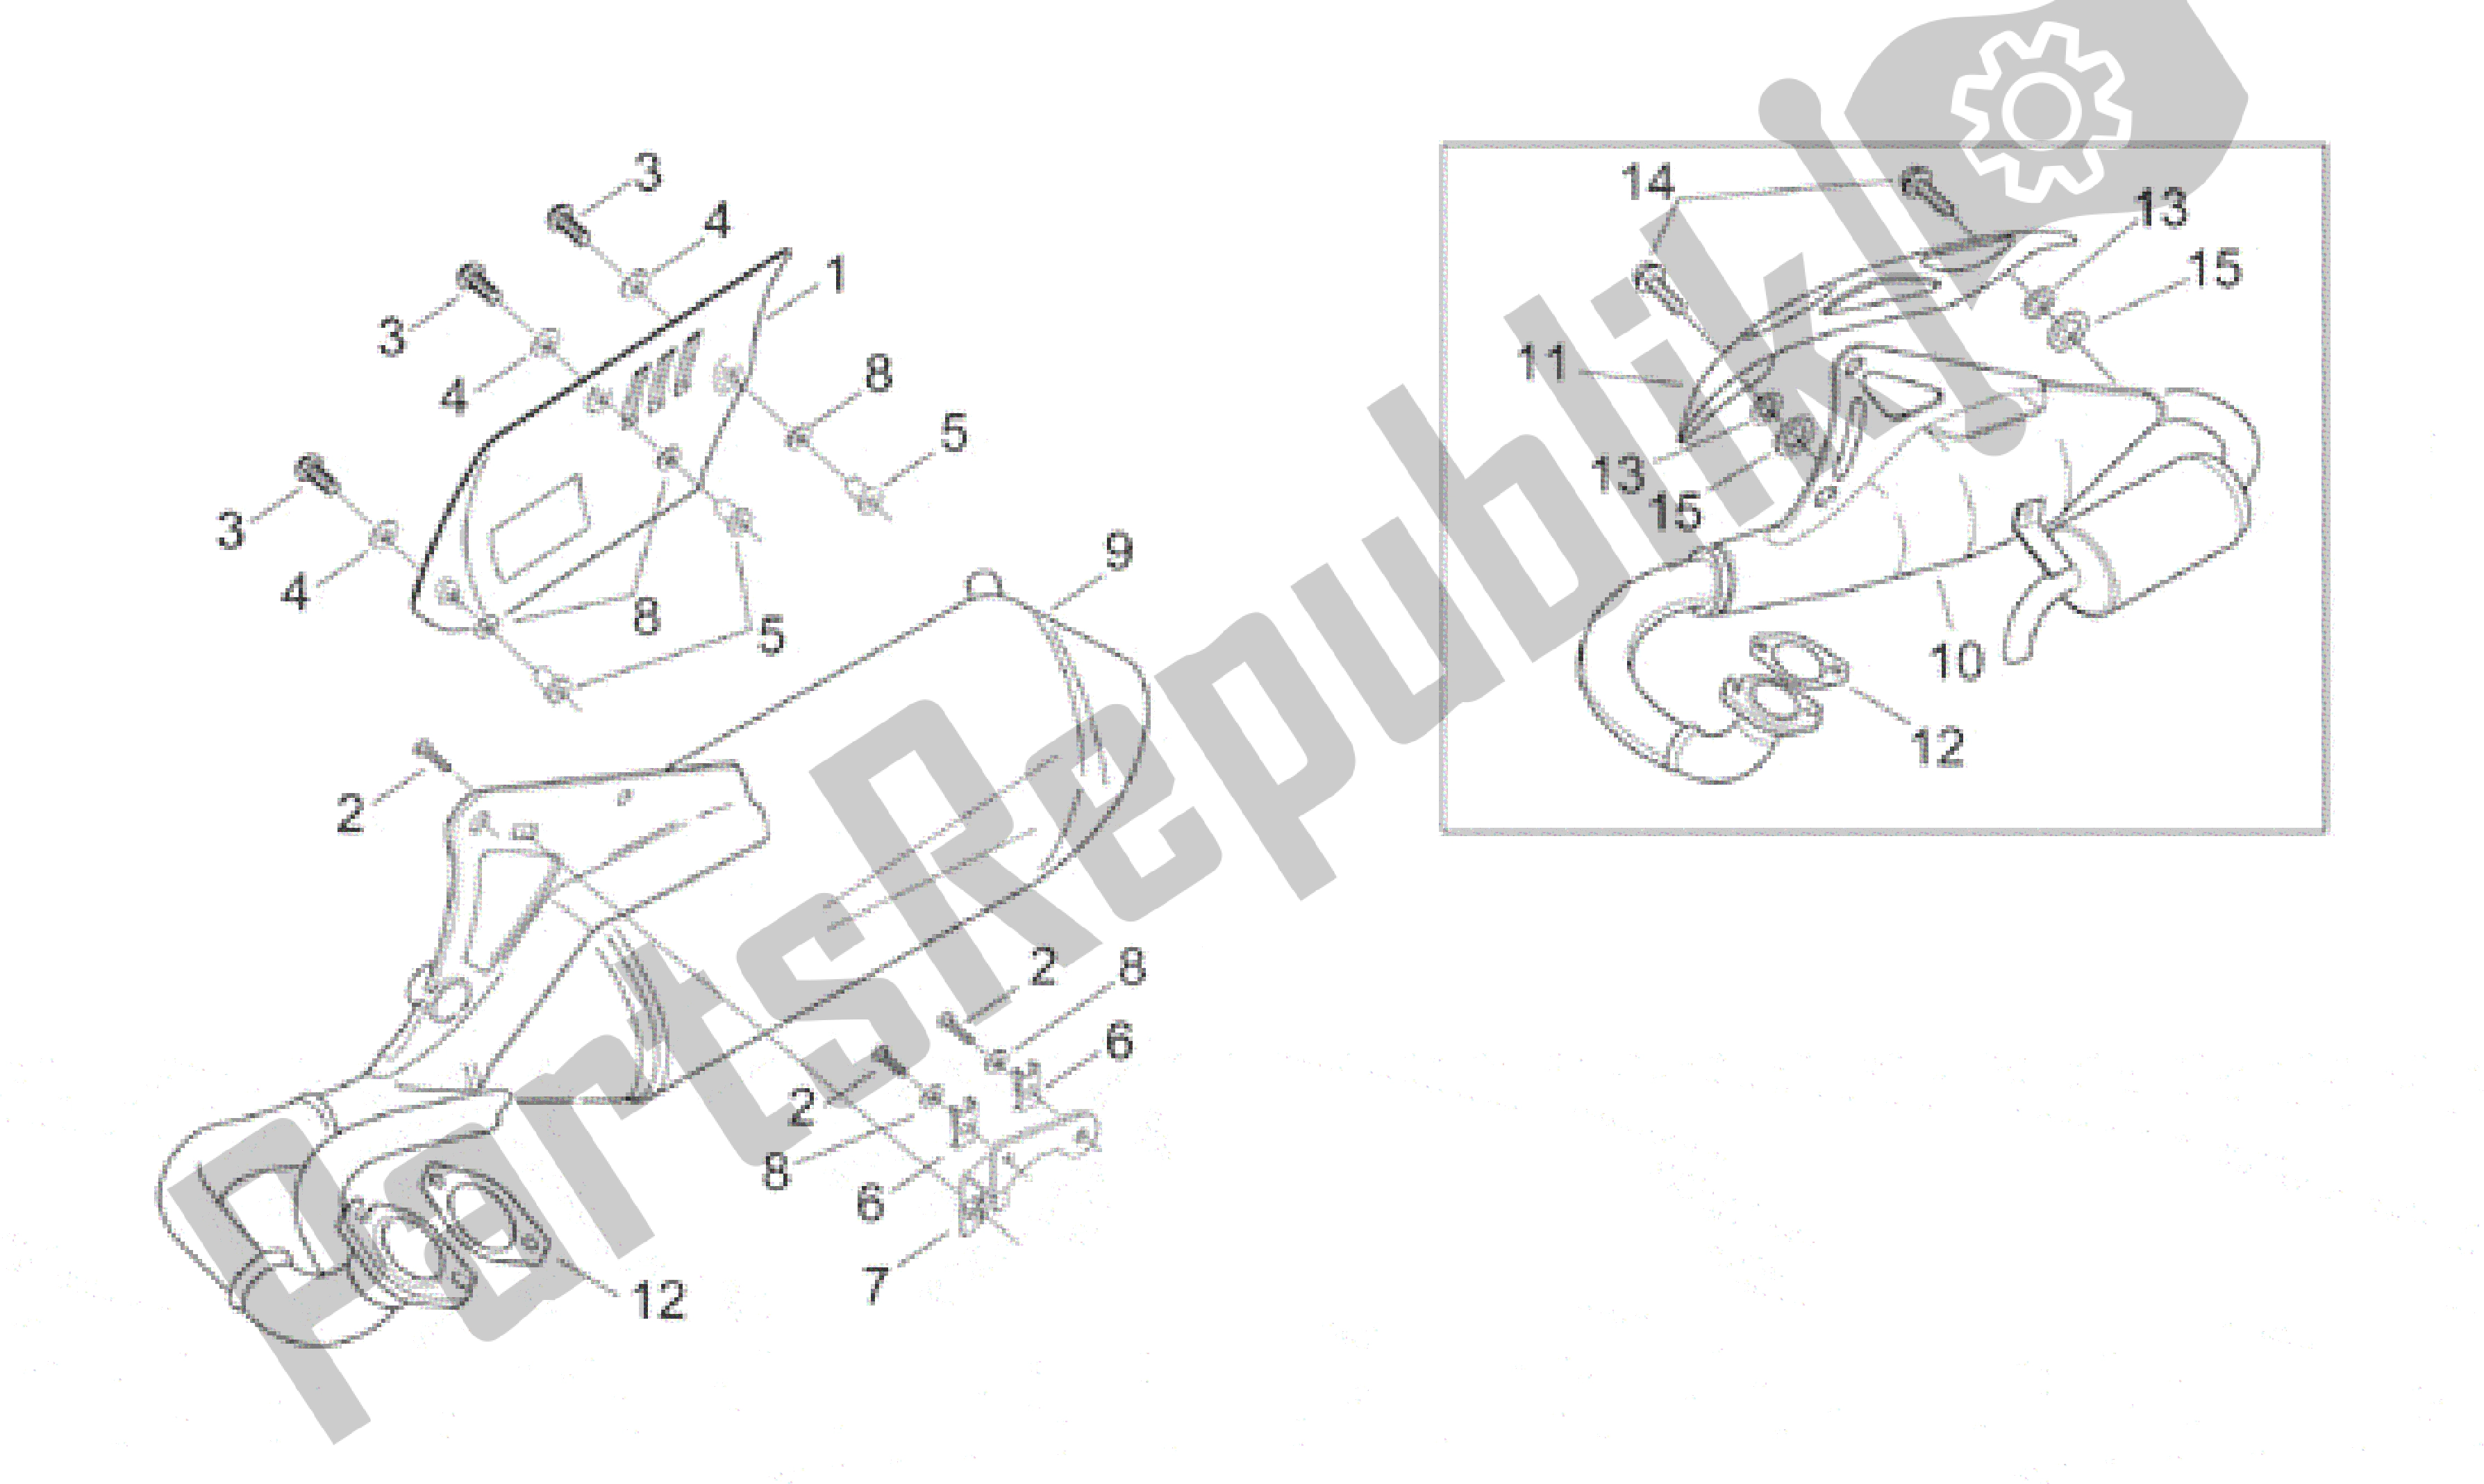 All parts for the Catalytic Exhaust Unit of the Aprilia Sonic 50 1998 - 2001